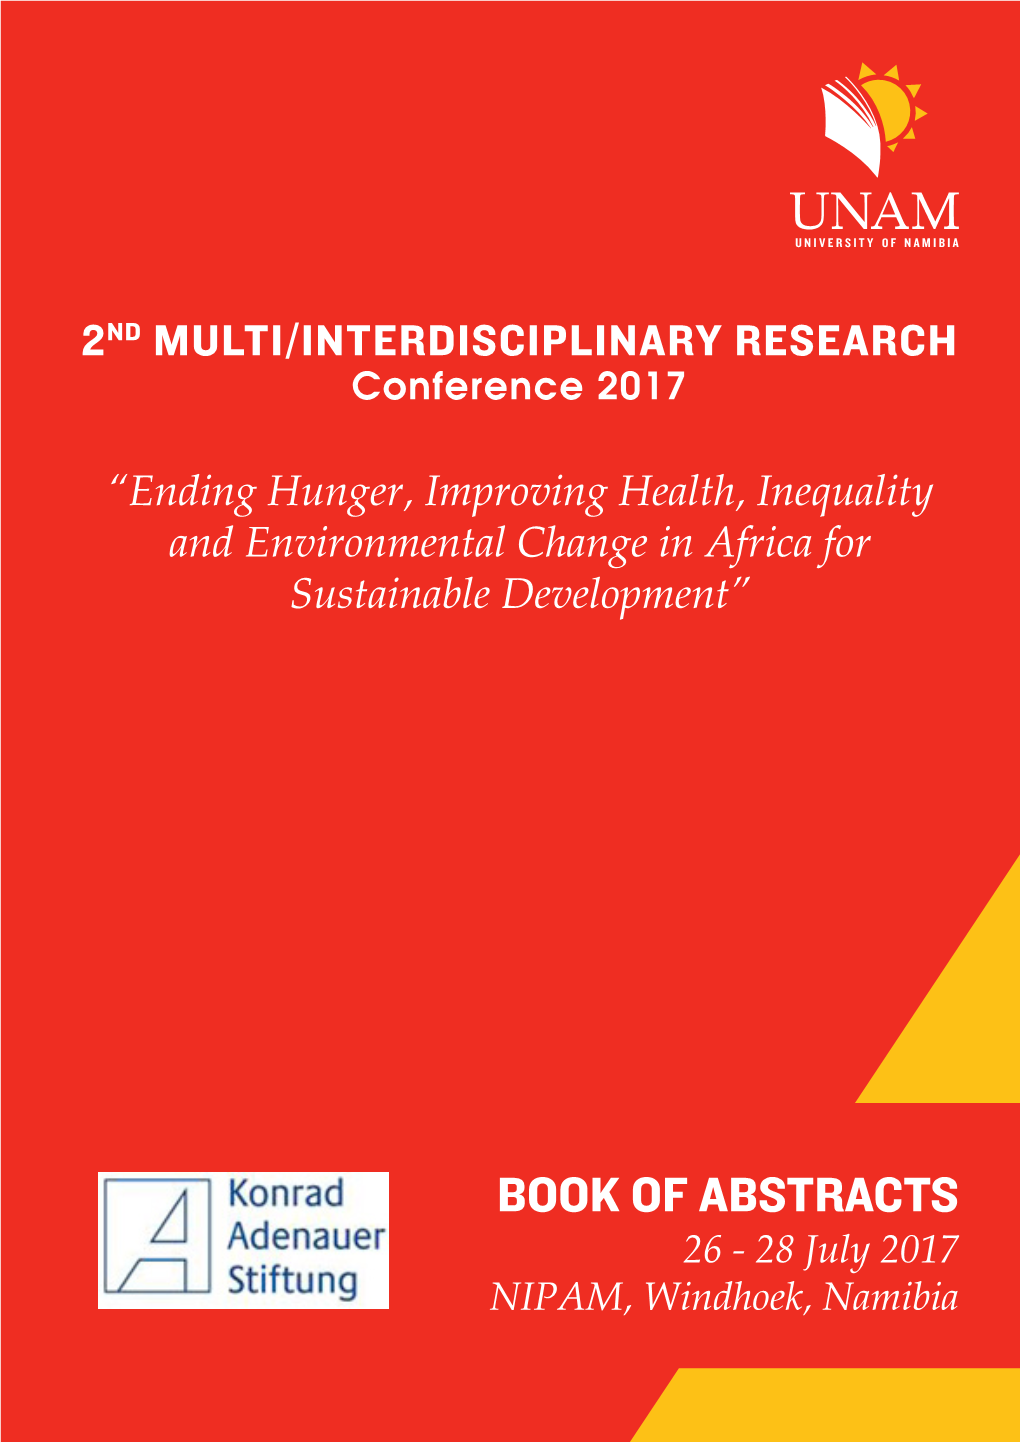 BOOK of ABSTRACTS 26 - 28 July 2017 NIPAM, Windhoek, Namibia